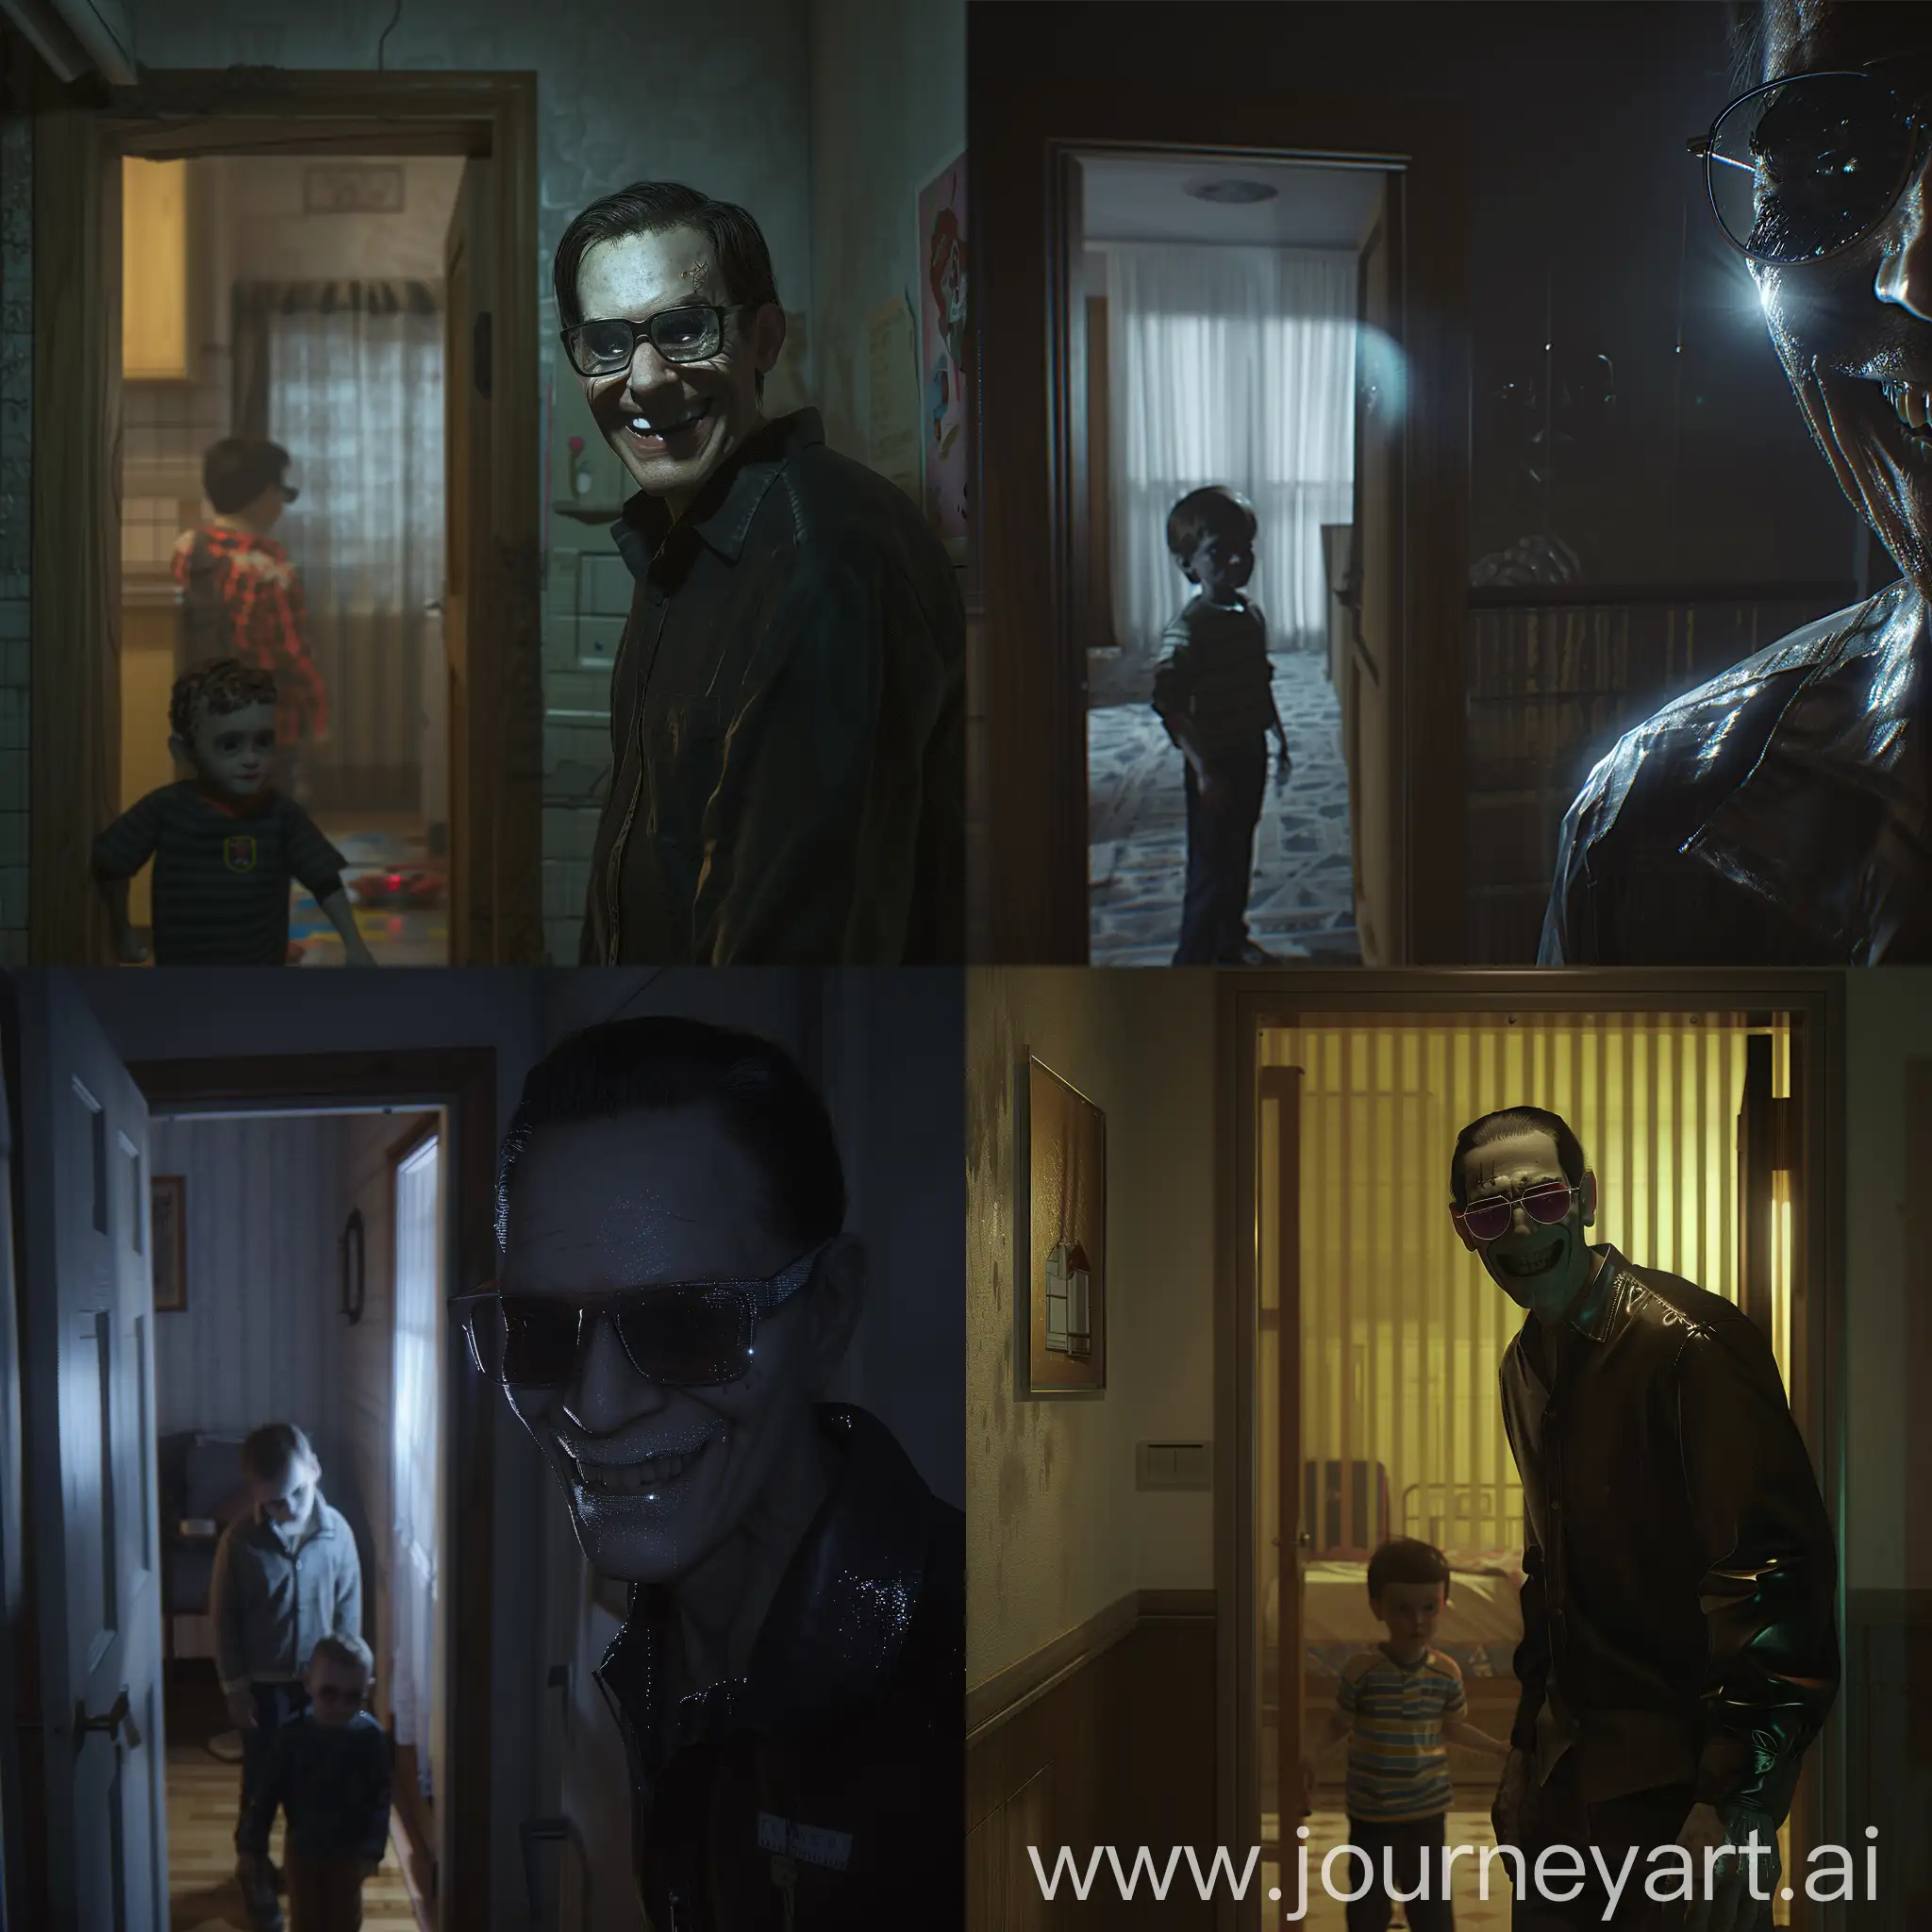 Creepy-Man-with-Shiny-Glasses-Smiling-at-Little-Boy-in-Gloomy-Apartment-Scene